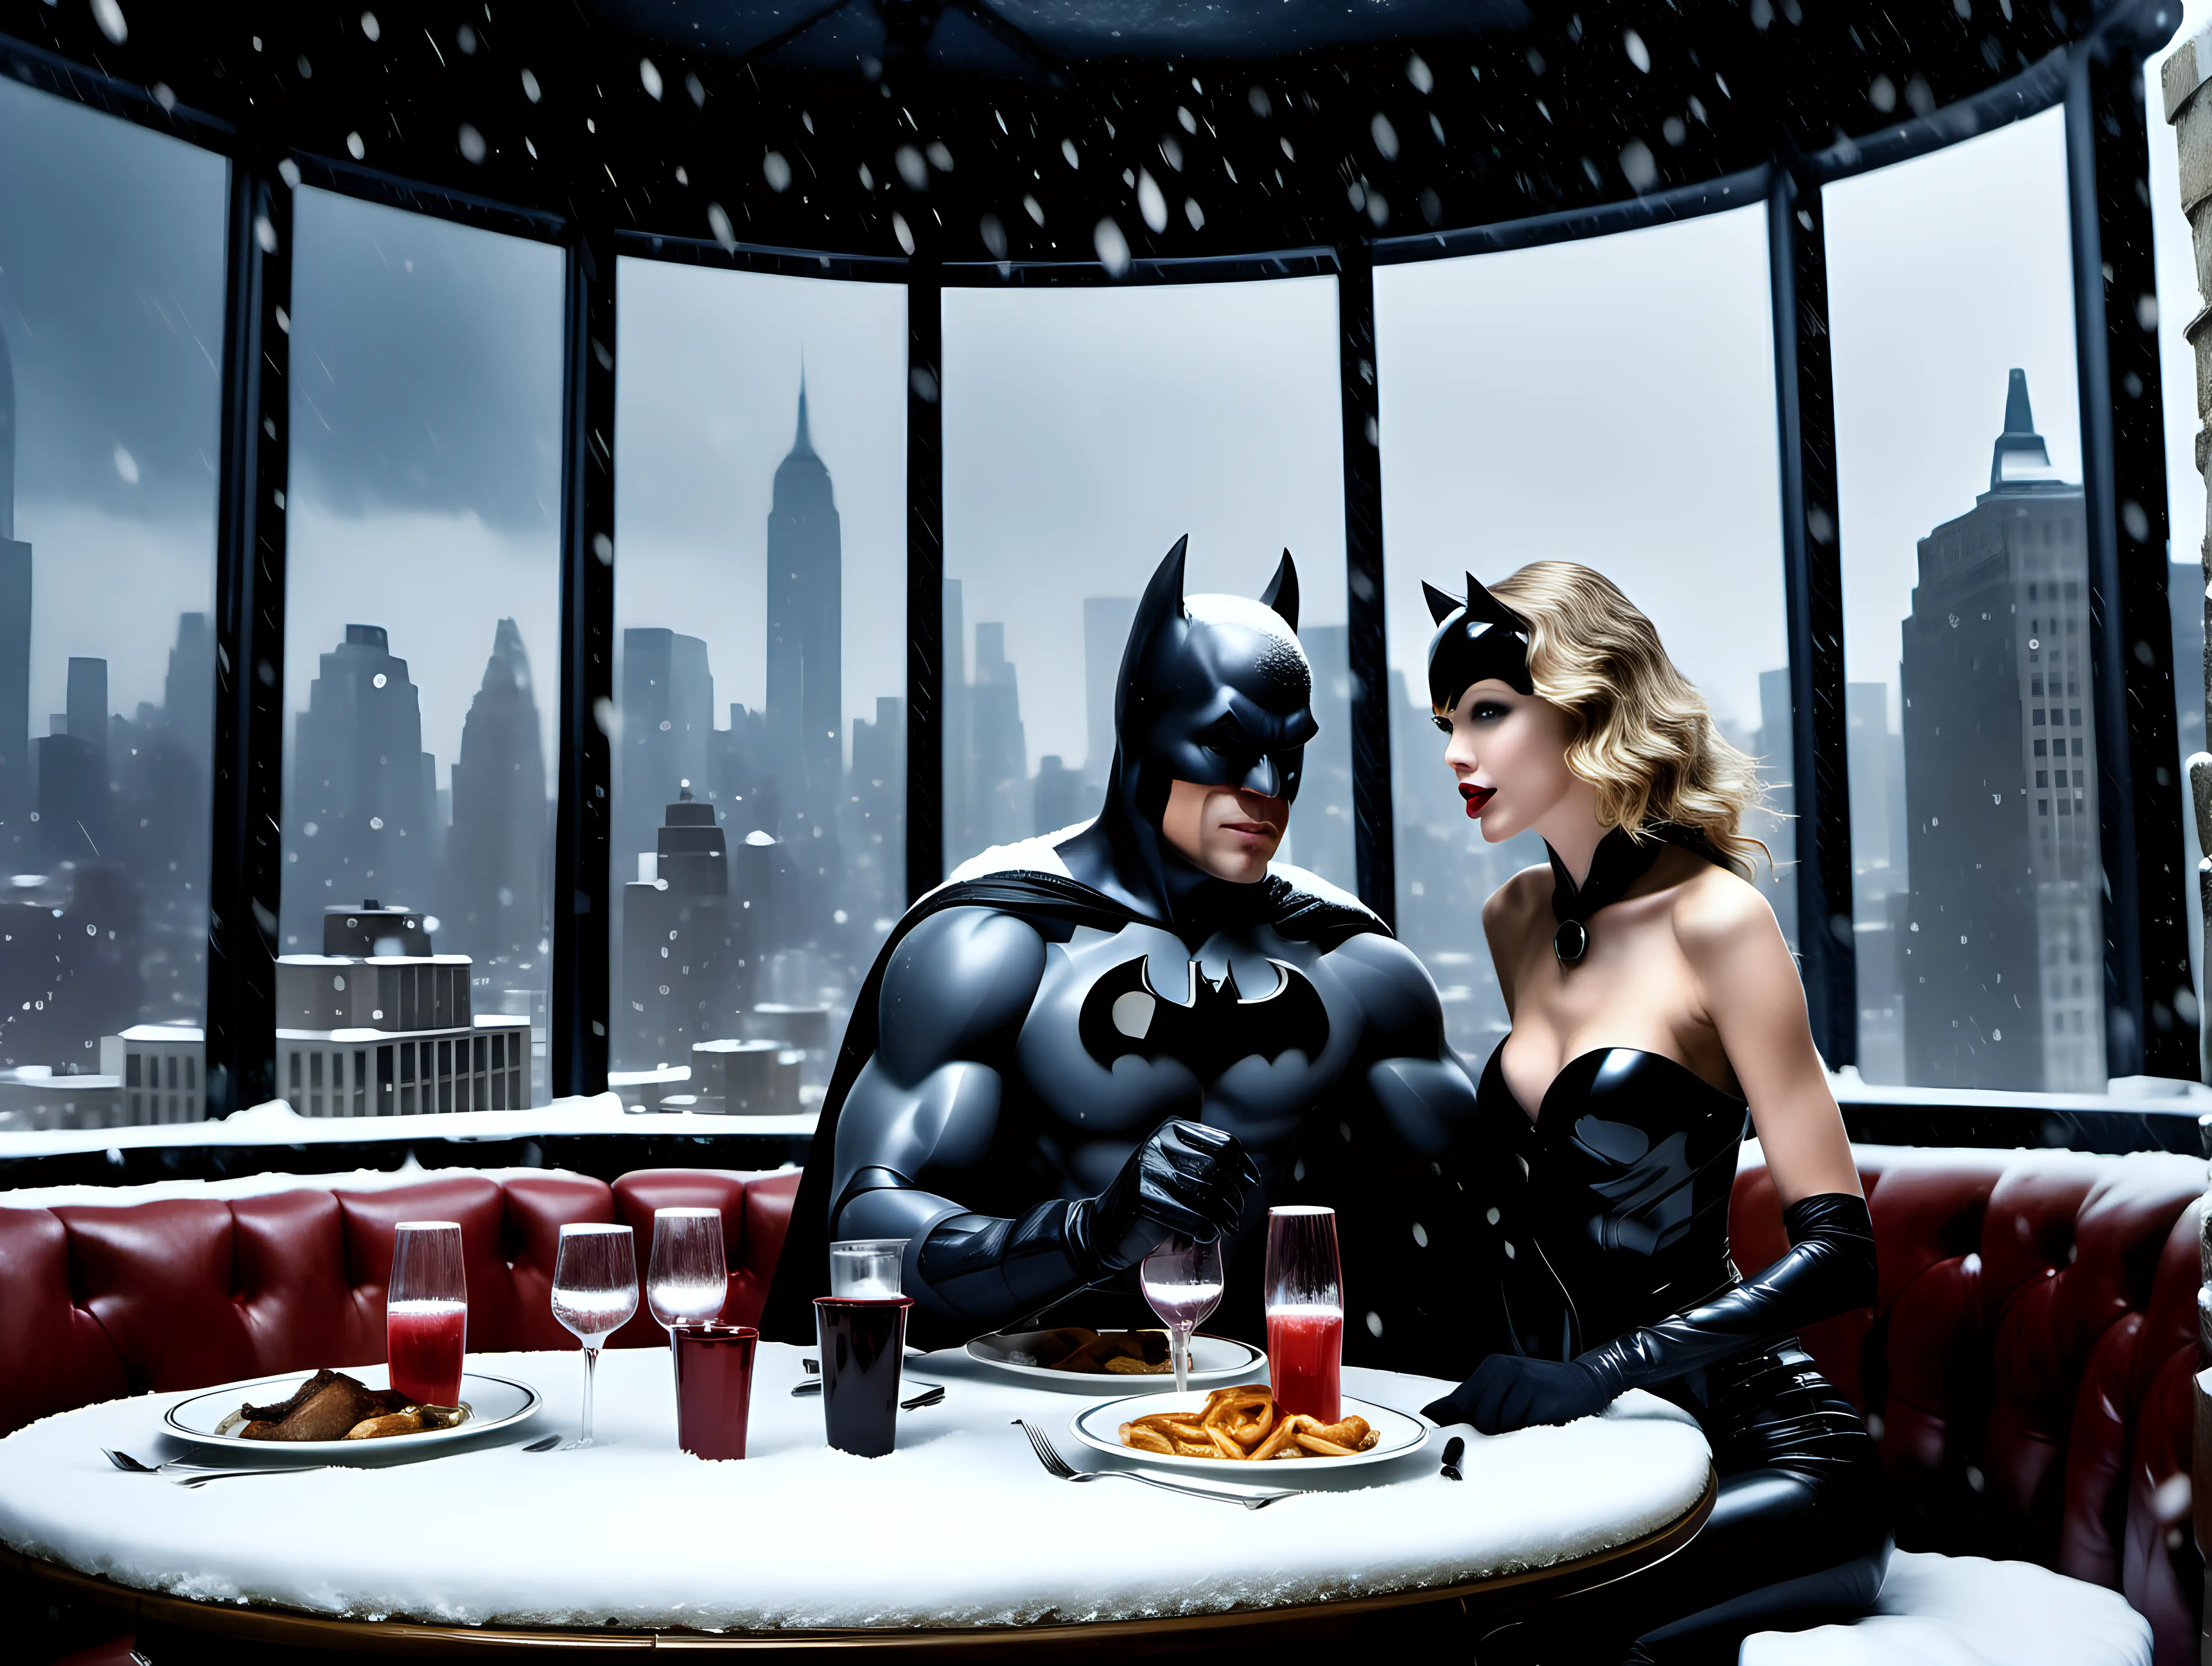 wide view Taylor Swift as Cat woman and Brad Pitt as Batman  on a date in a fancy restaurant overlooking NYC during a snow storm Frank Frazetta style